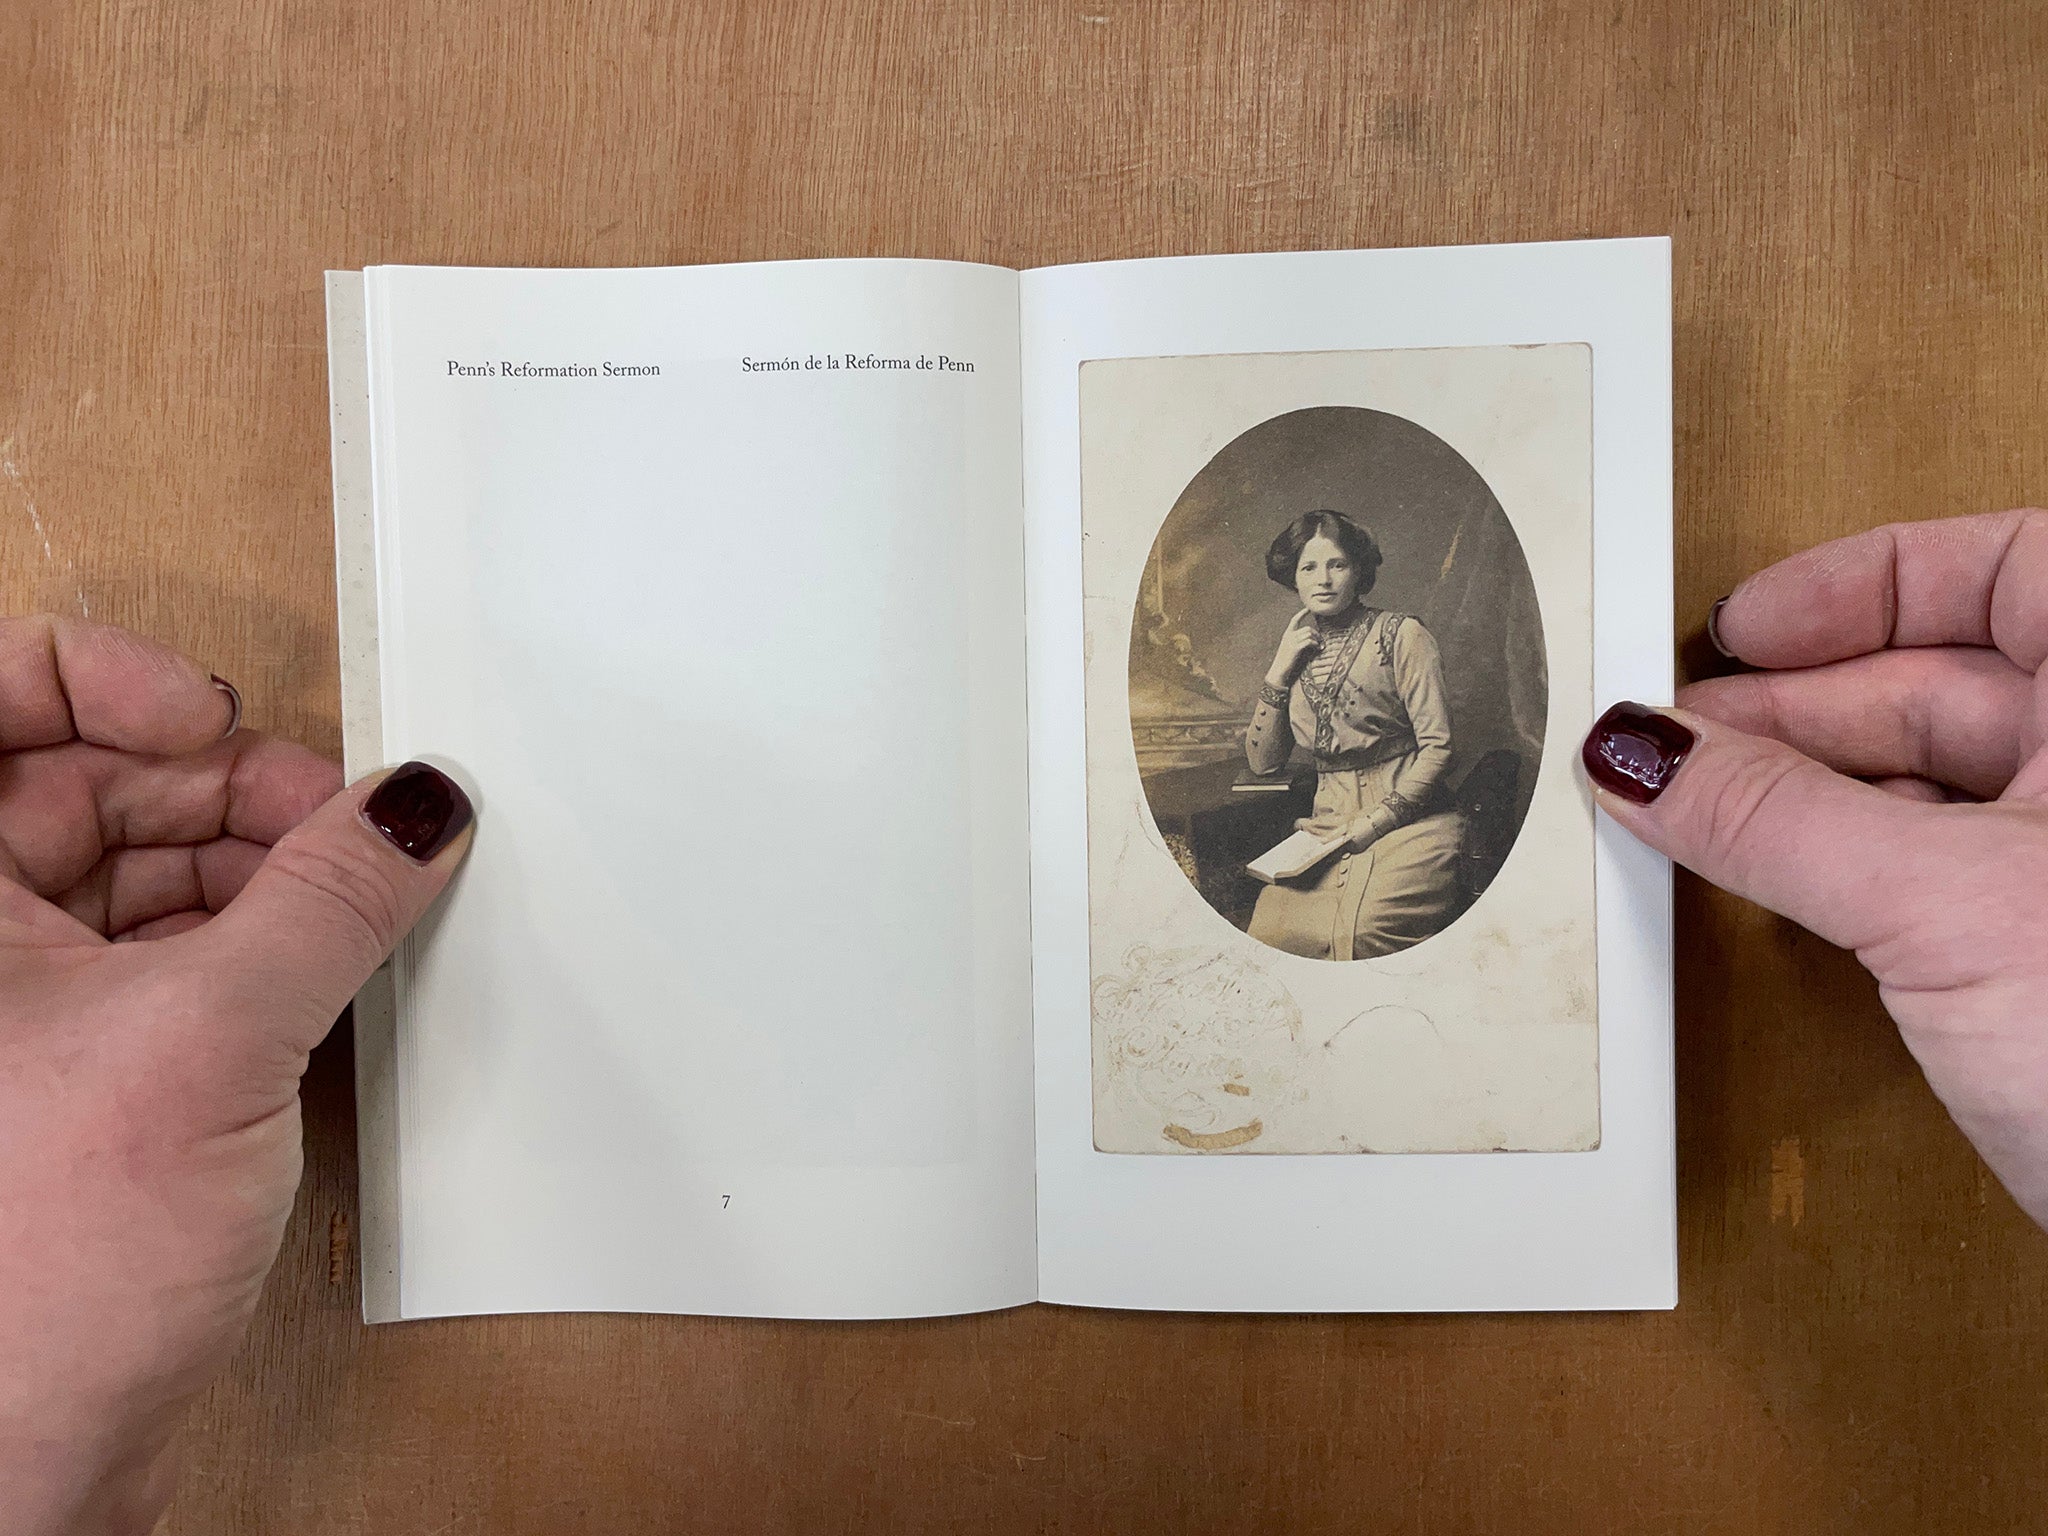 A CATALOGUE OF A YOUNG COUNTRY LADIES LIBRARY by Louis Porter